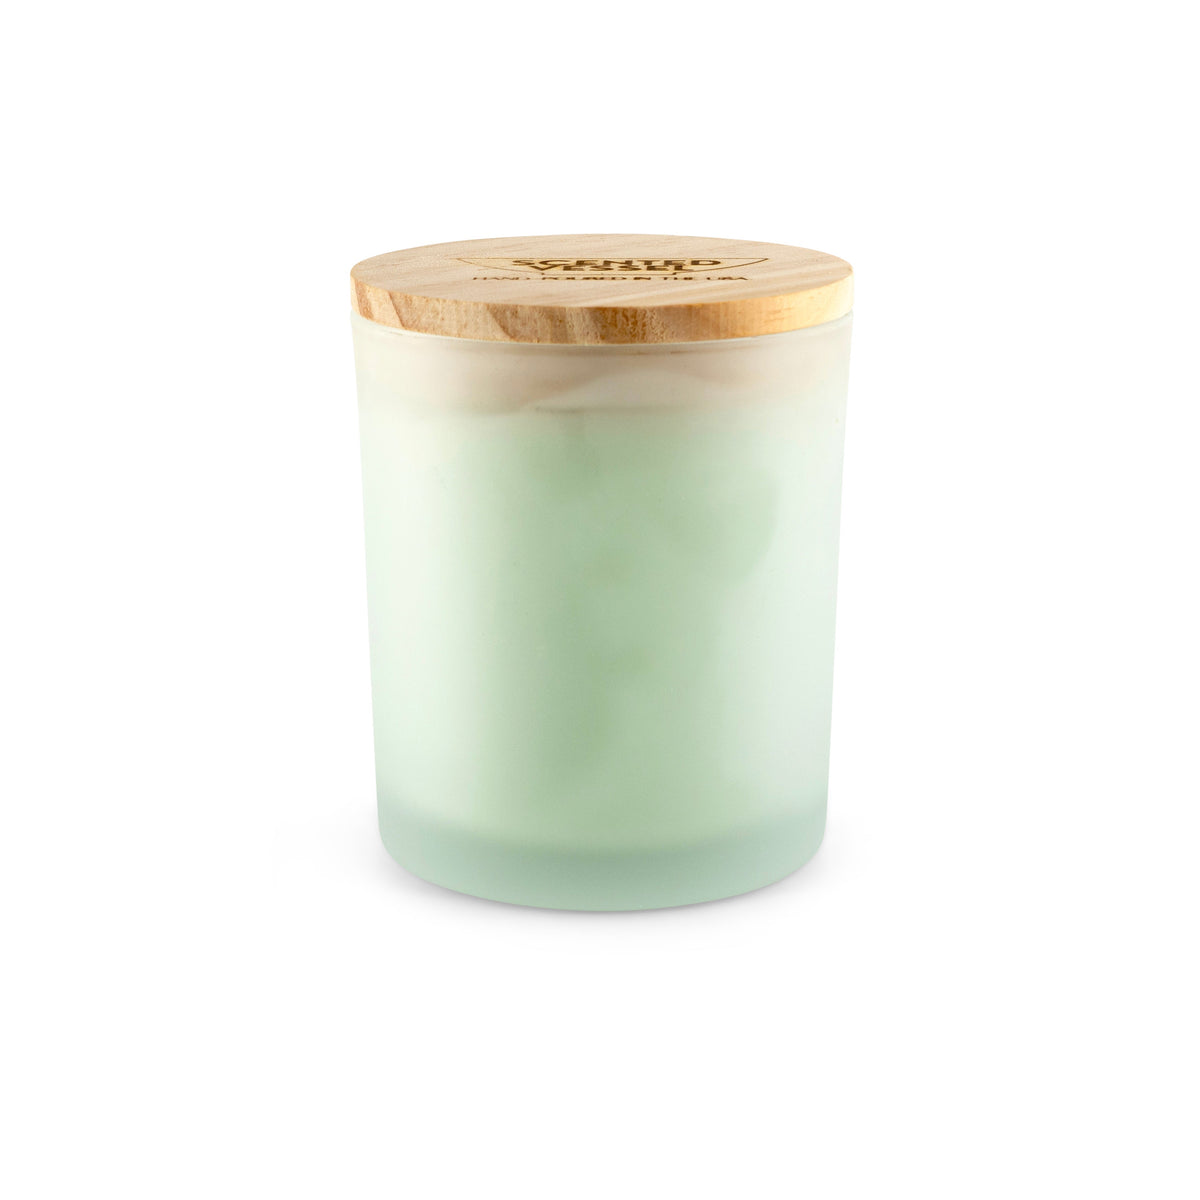 Fresh Pine 7.5oz Soy Wax Blend Candle by Scented Vessel